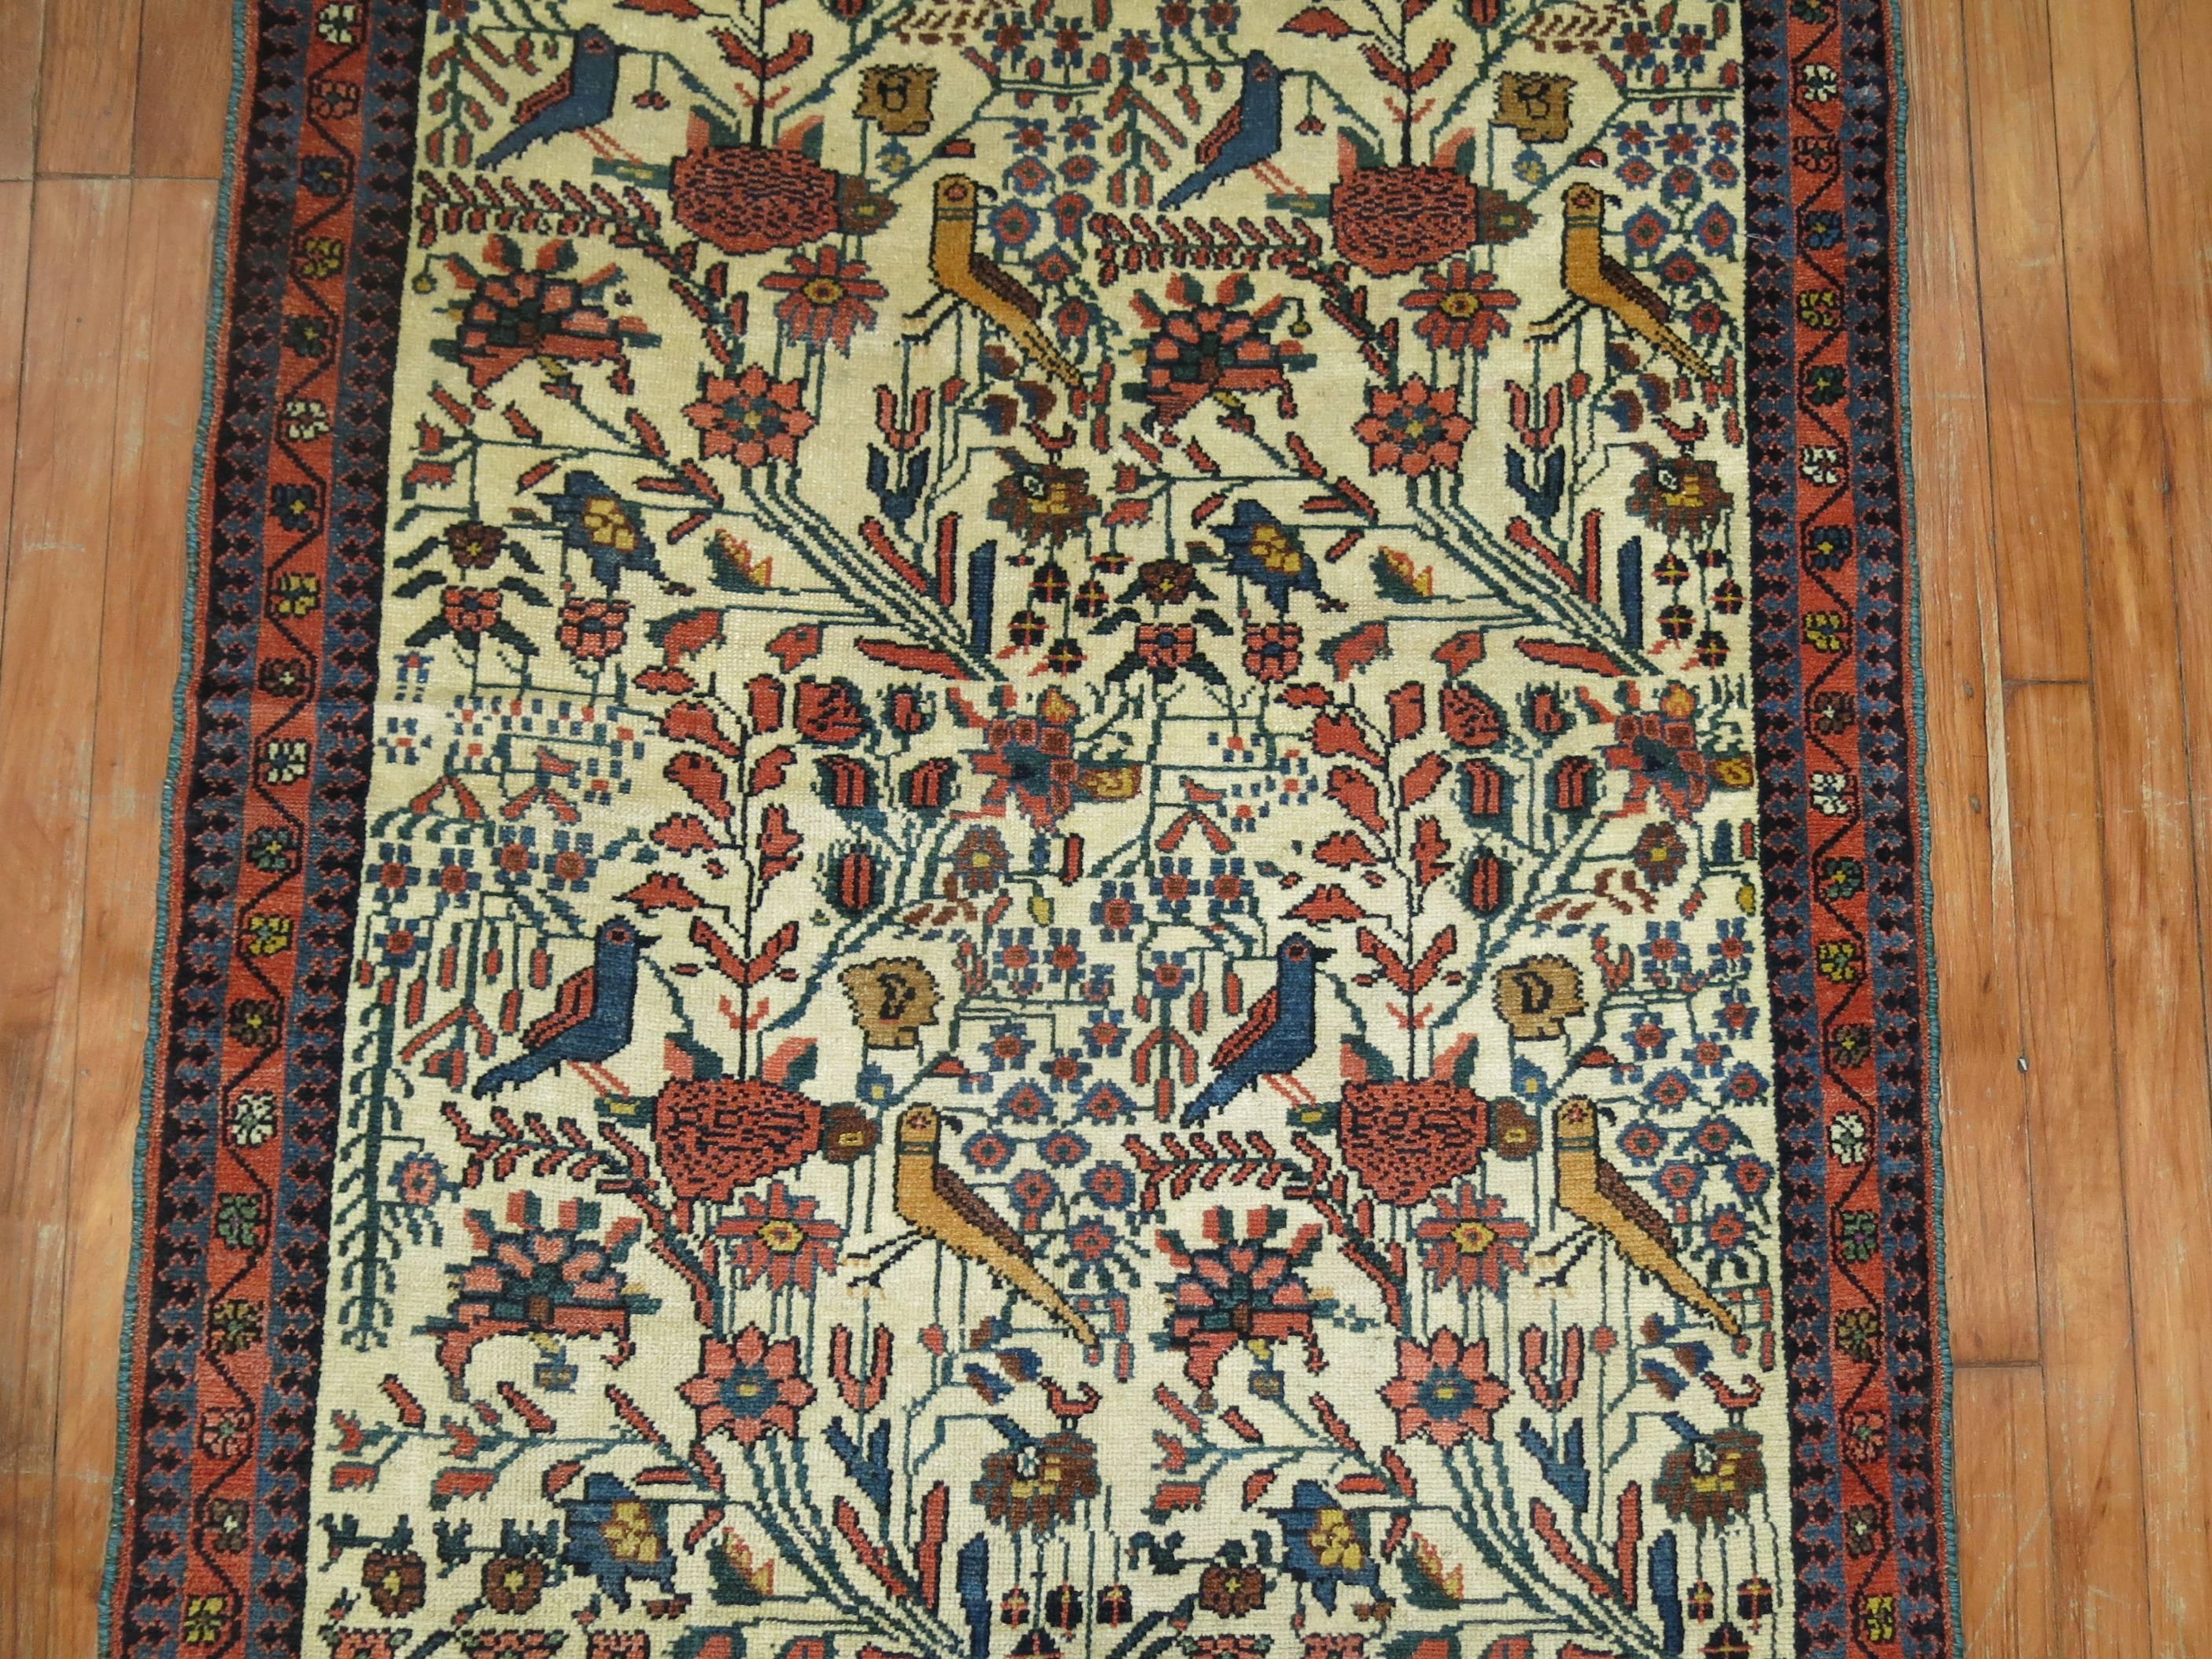 Ivory Field Pigeon Bird Traditional 20th century Persian Pictorial Rug In Good Condition For Sale In New York, NY